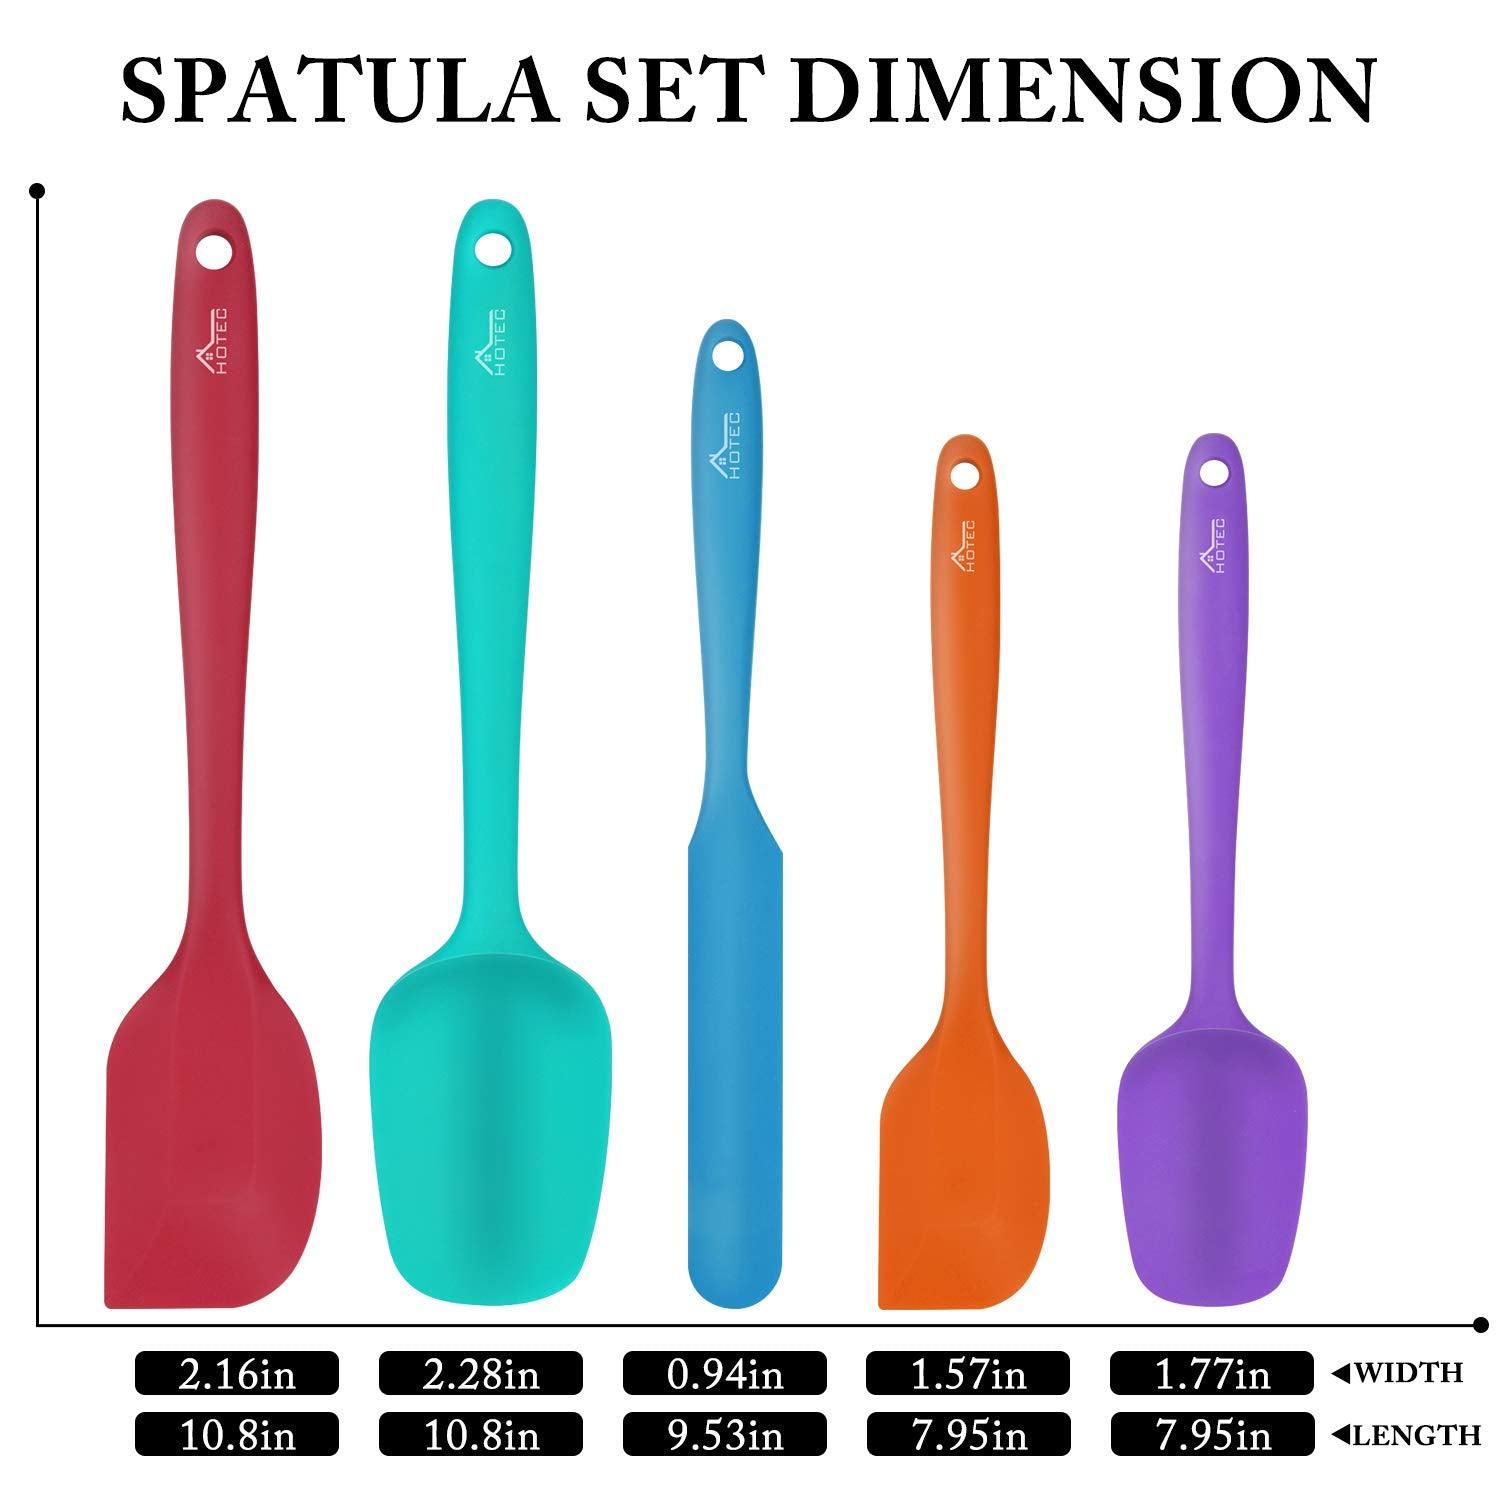 HOTEC Food Grade Silicone Rubber Spatula Set for Baking, Cooking, and Mixing High Heat Resistant Non Stick Dishwasher Safe BPA-Free Multicolor Set of 5 - CookCave